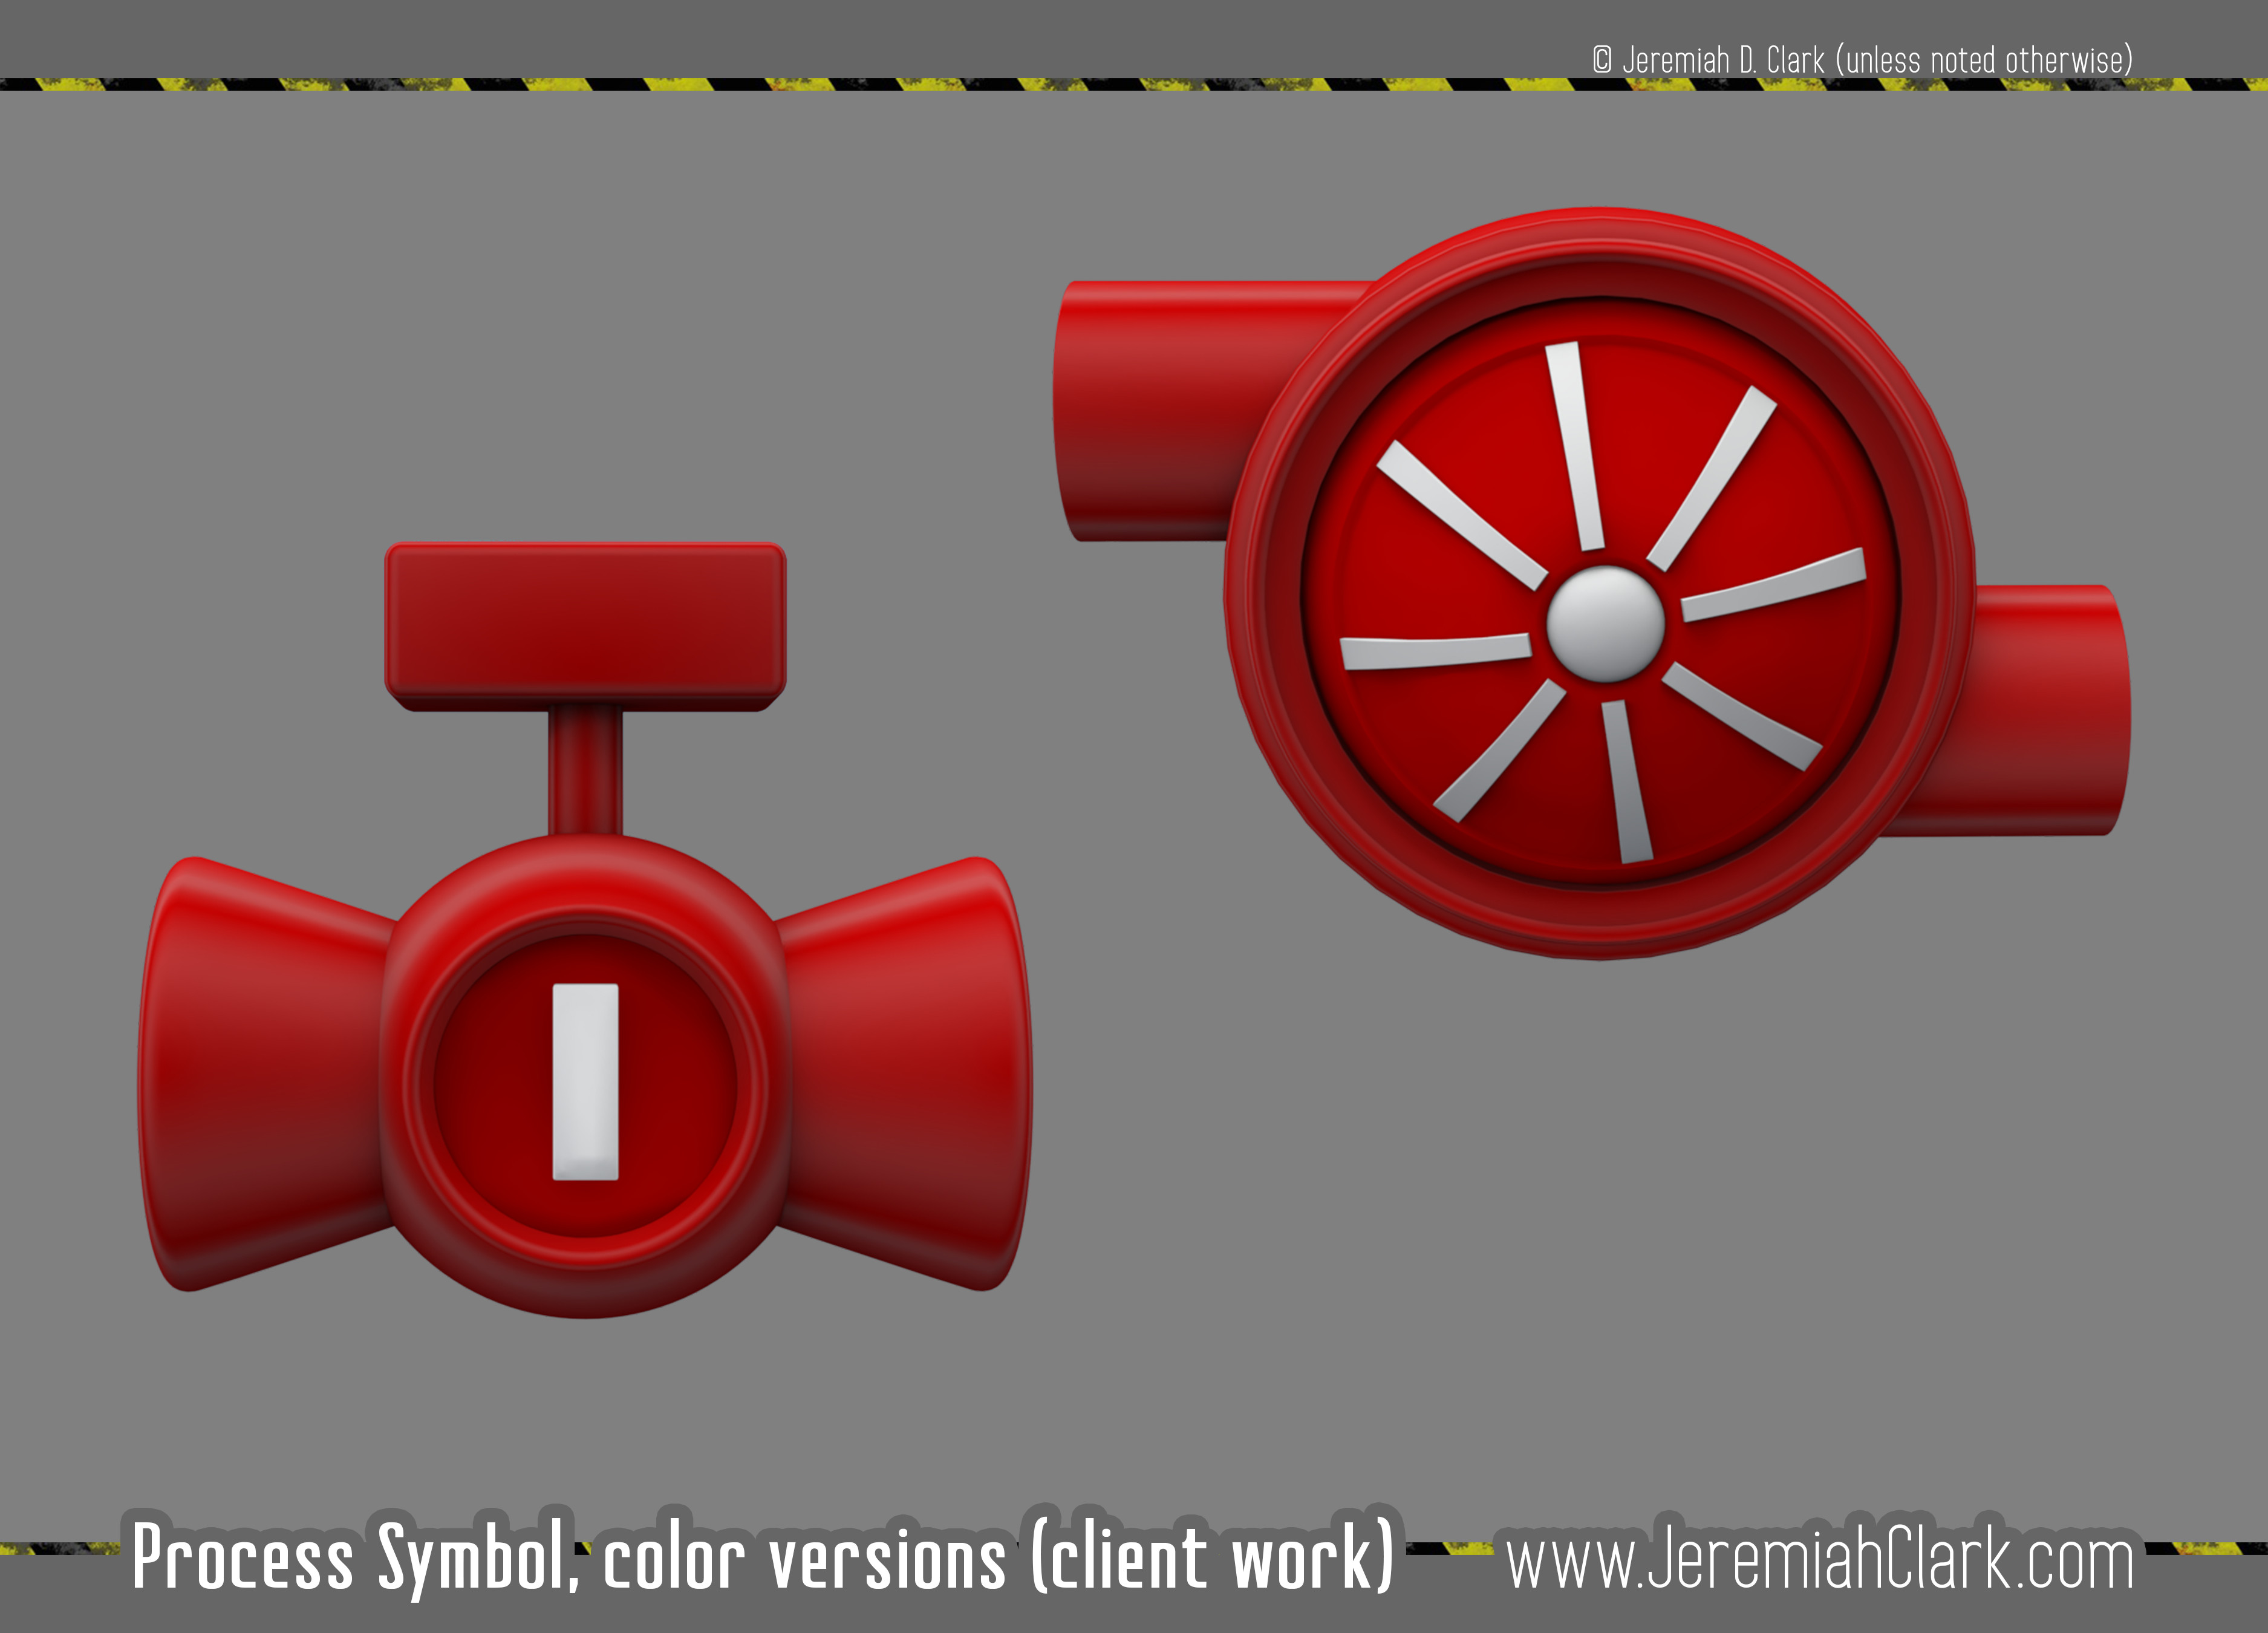 Color variation of piping process symbols, also shows the (closer to) final satin finish.
Modeled and textured in 3Ds Max.  
Rendered using V-Ray.  